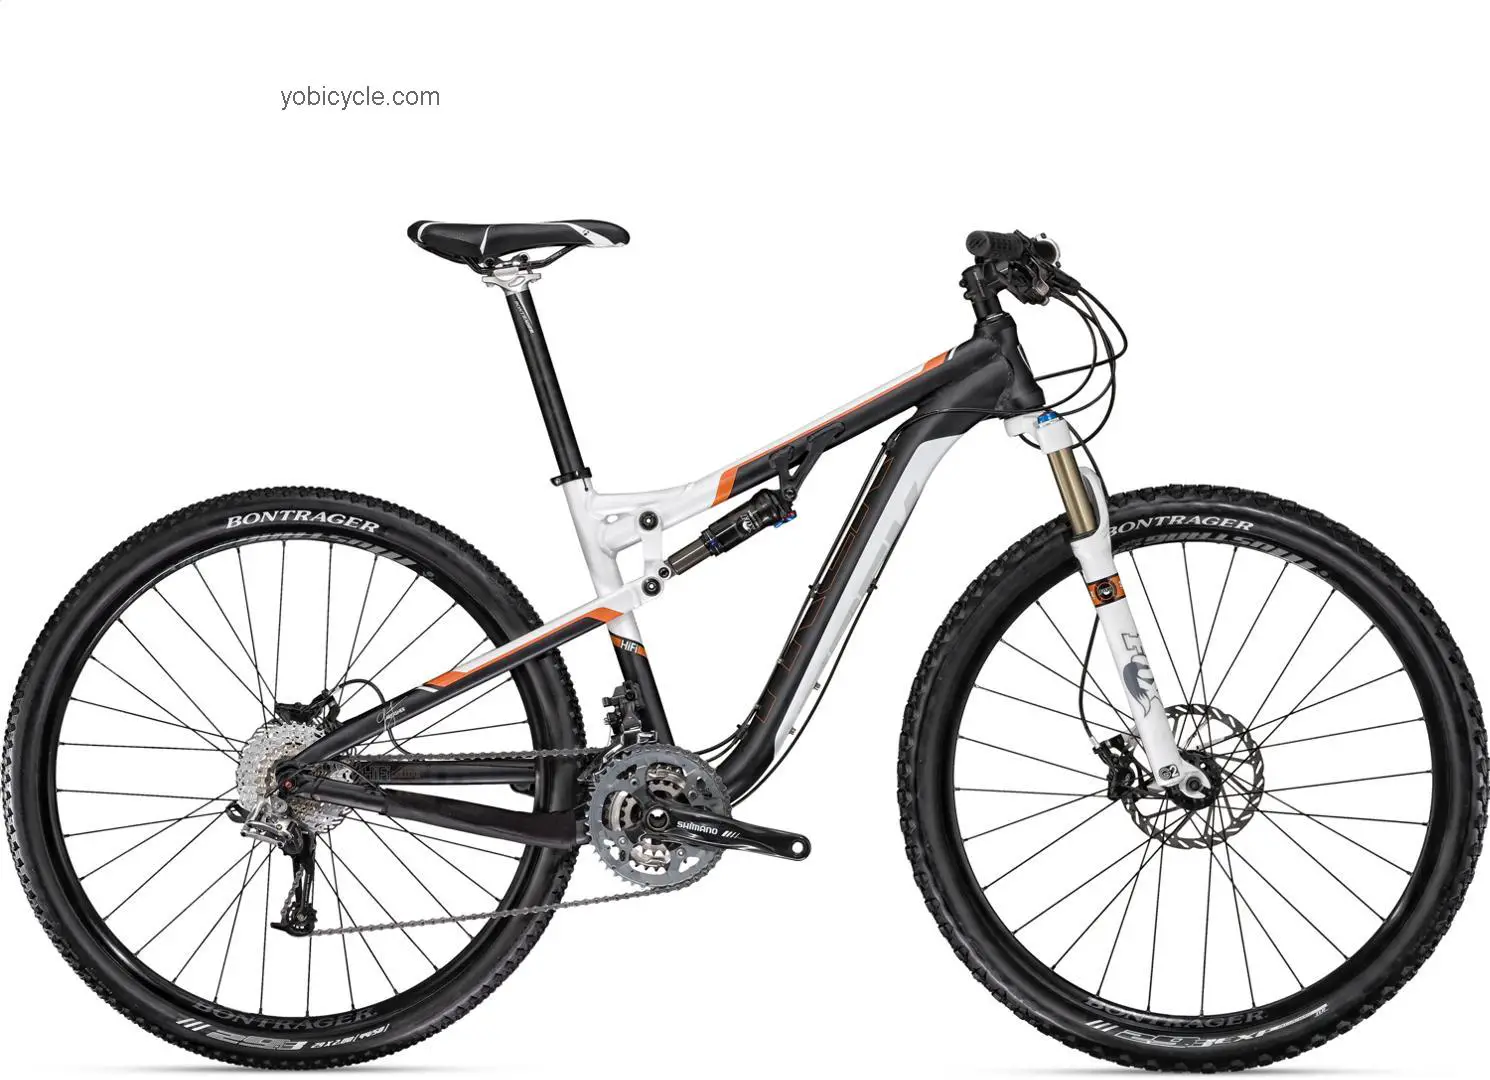 Trek Gary Fisher HiFi Deluxe competitors and comparison tool online specs and performance